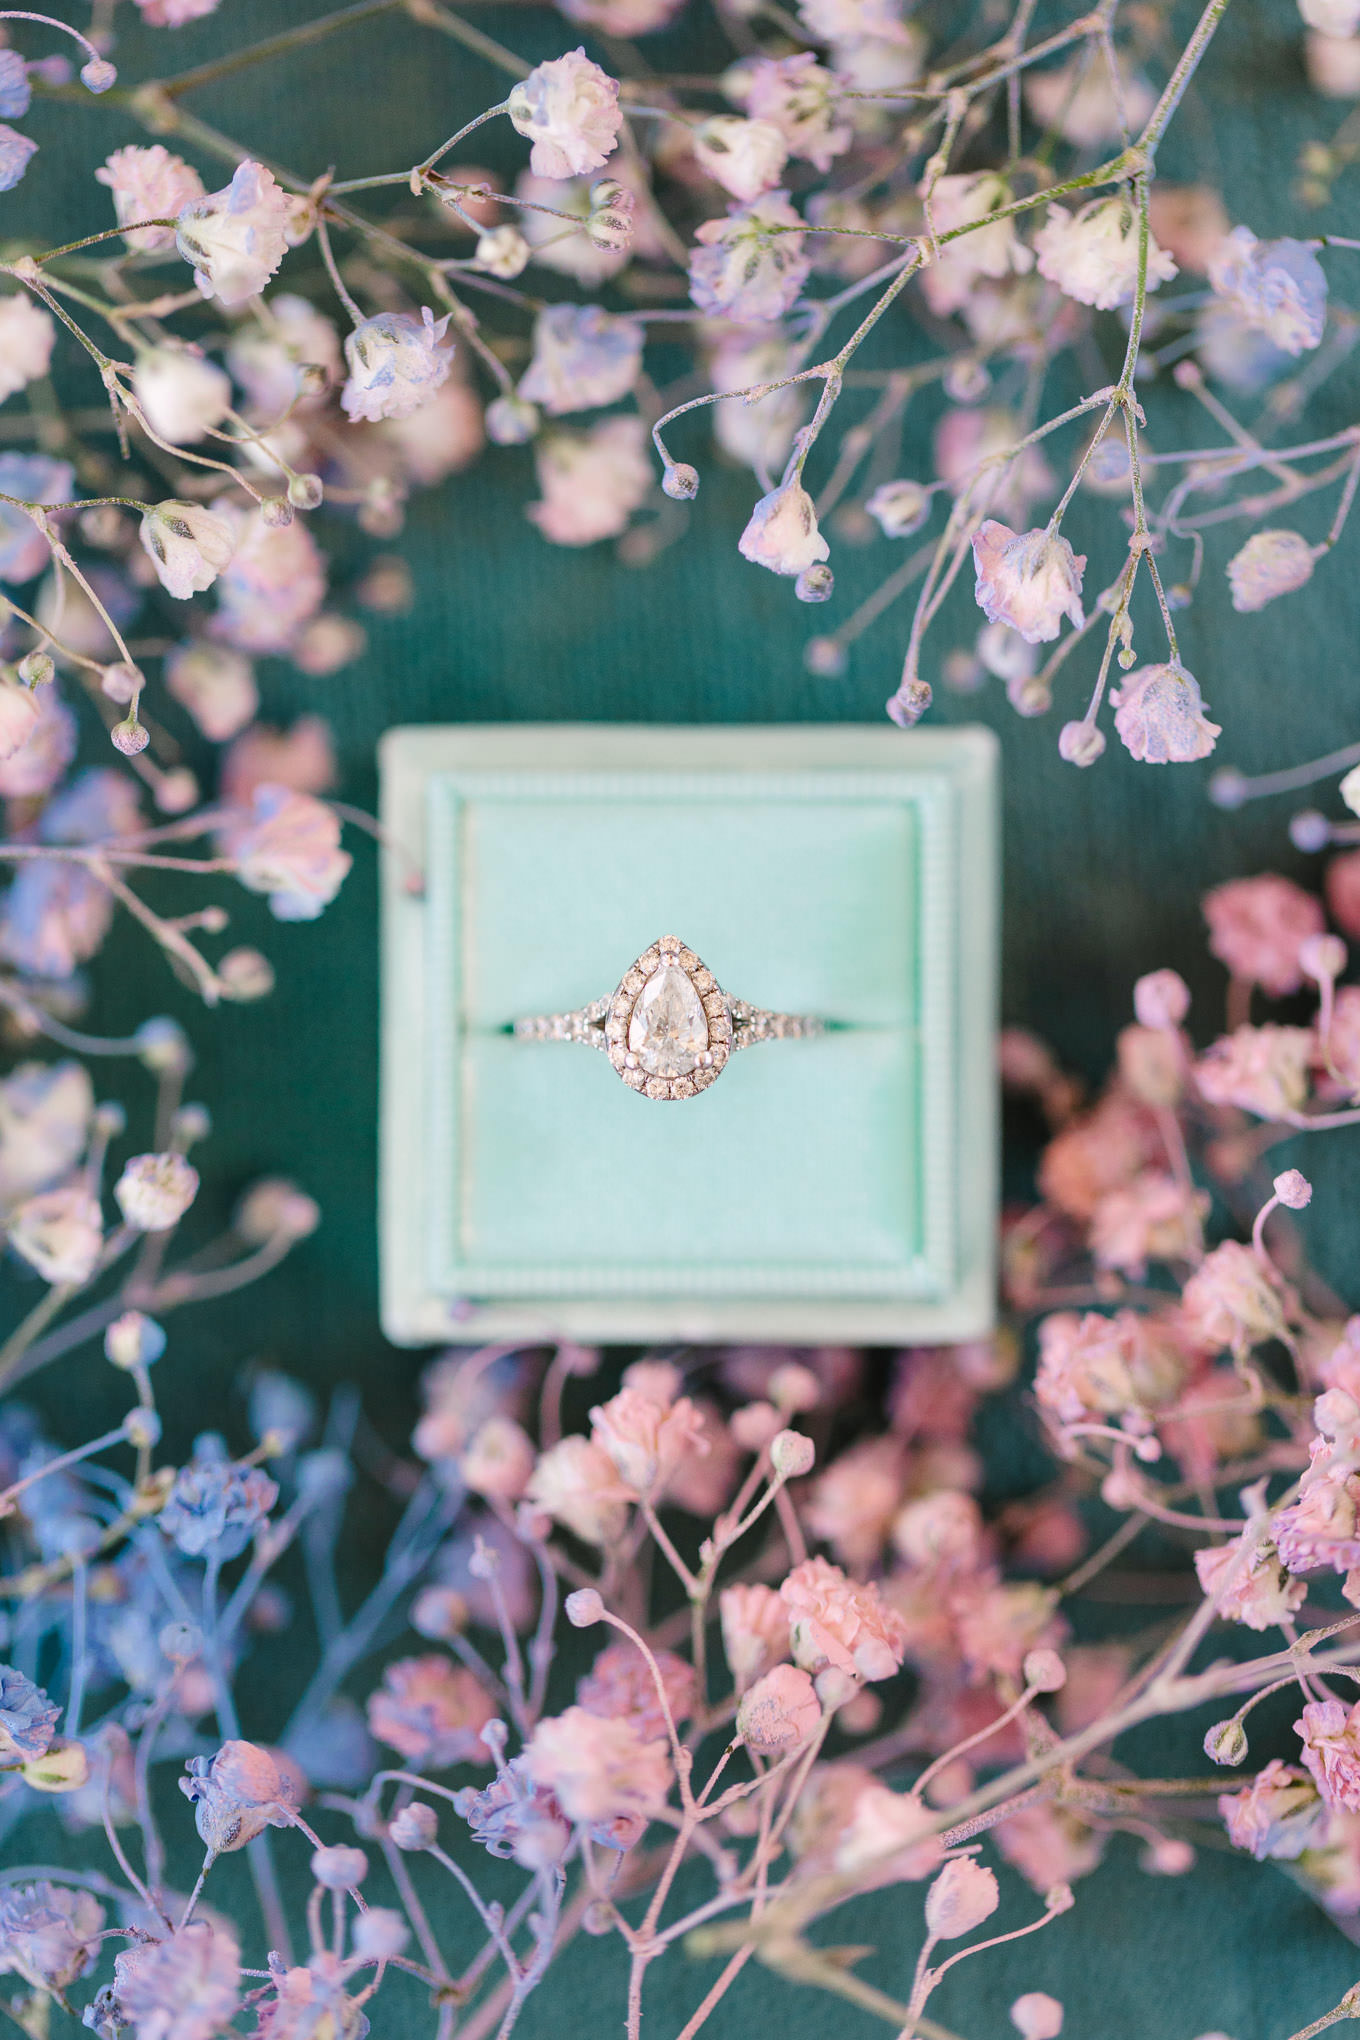 Engagement ring surrounded by baby's breath | Colorful and quirky wedding at Higuera Ranch in San Luis Obispo | #sanluisobispowedding #californiawedding #higueraranch #madonnainn   
Source: Mary Costa Photography | Los Angeles